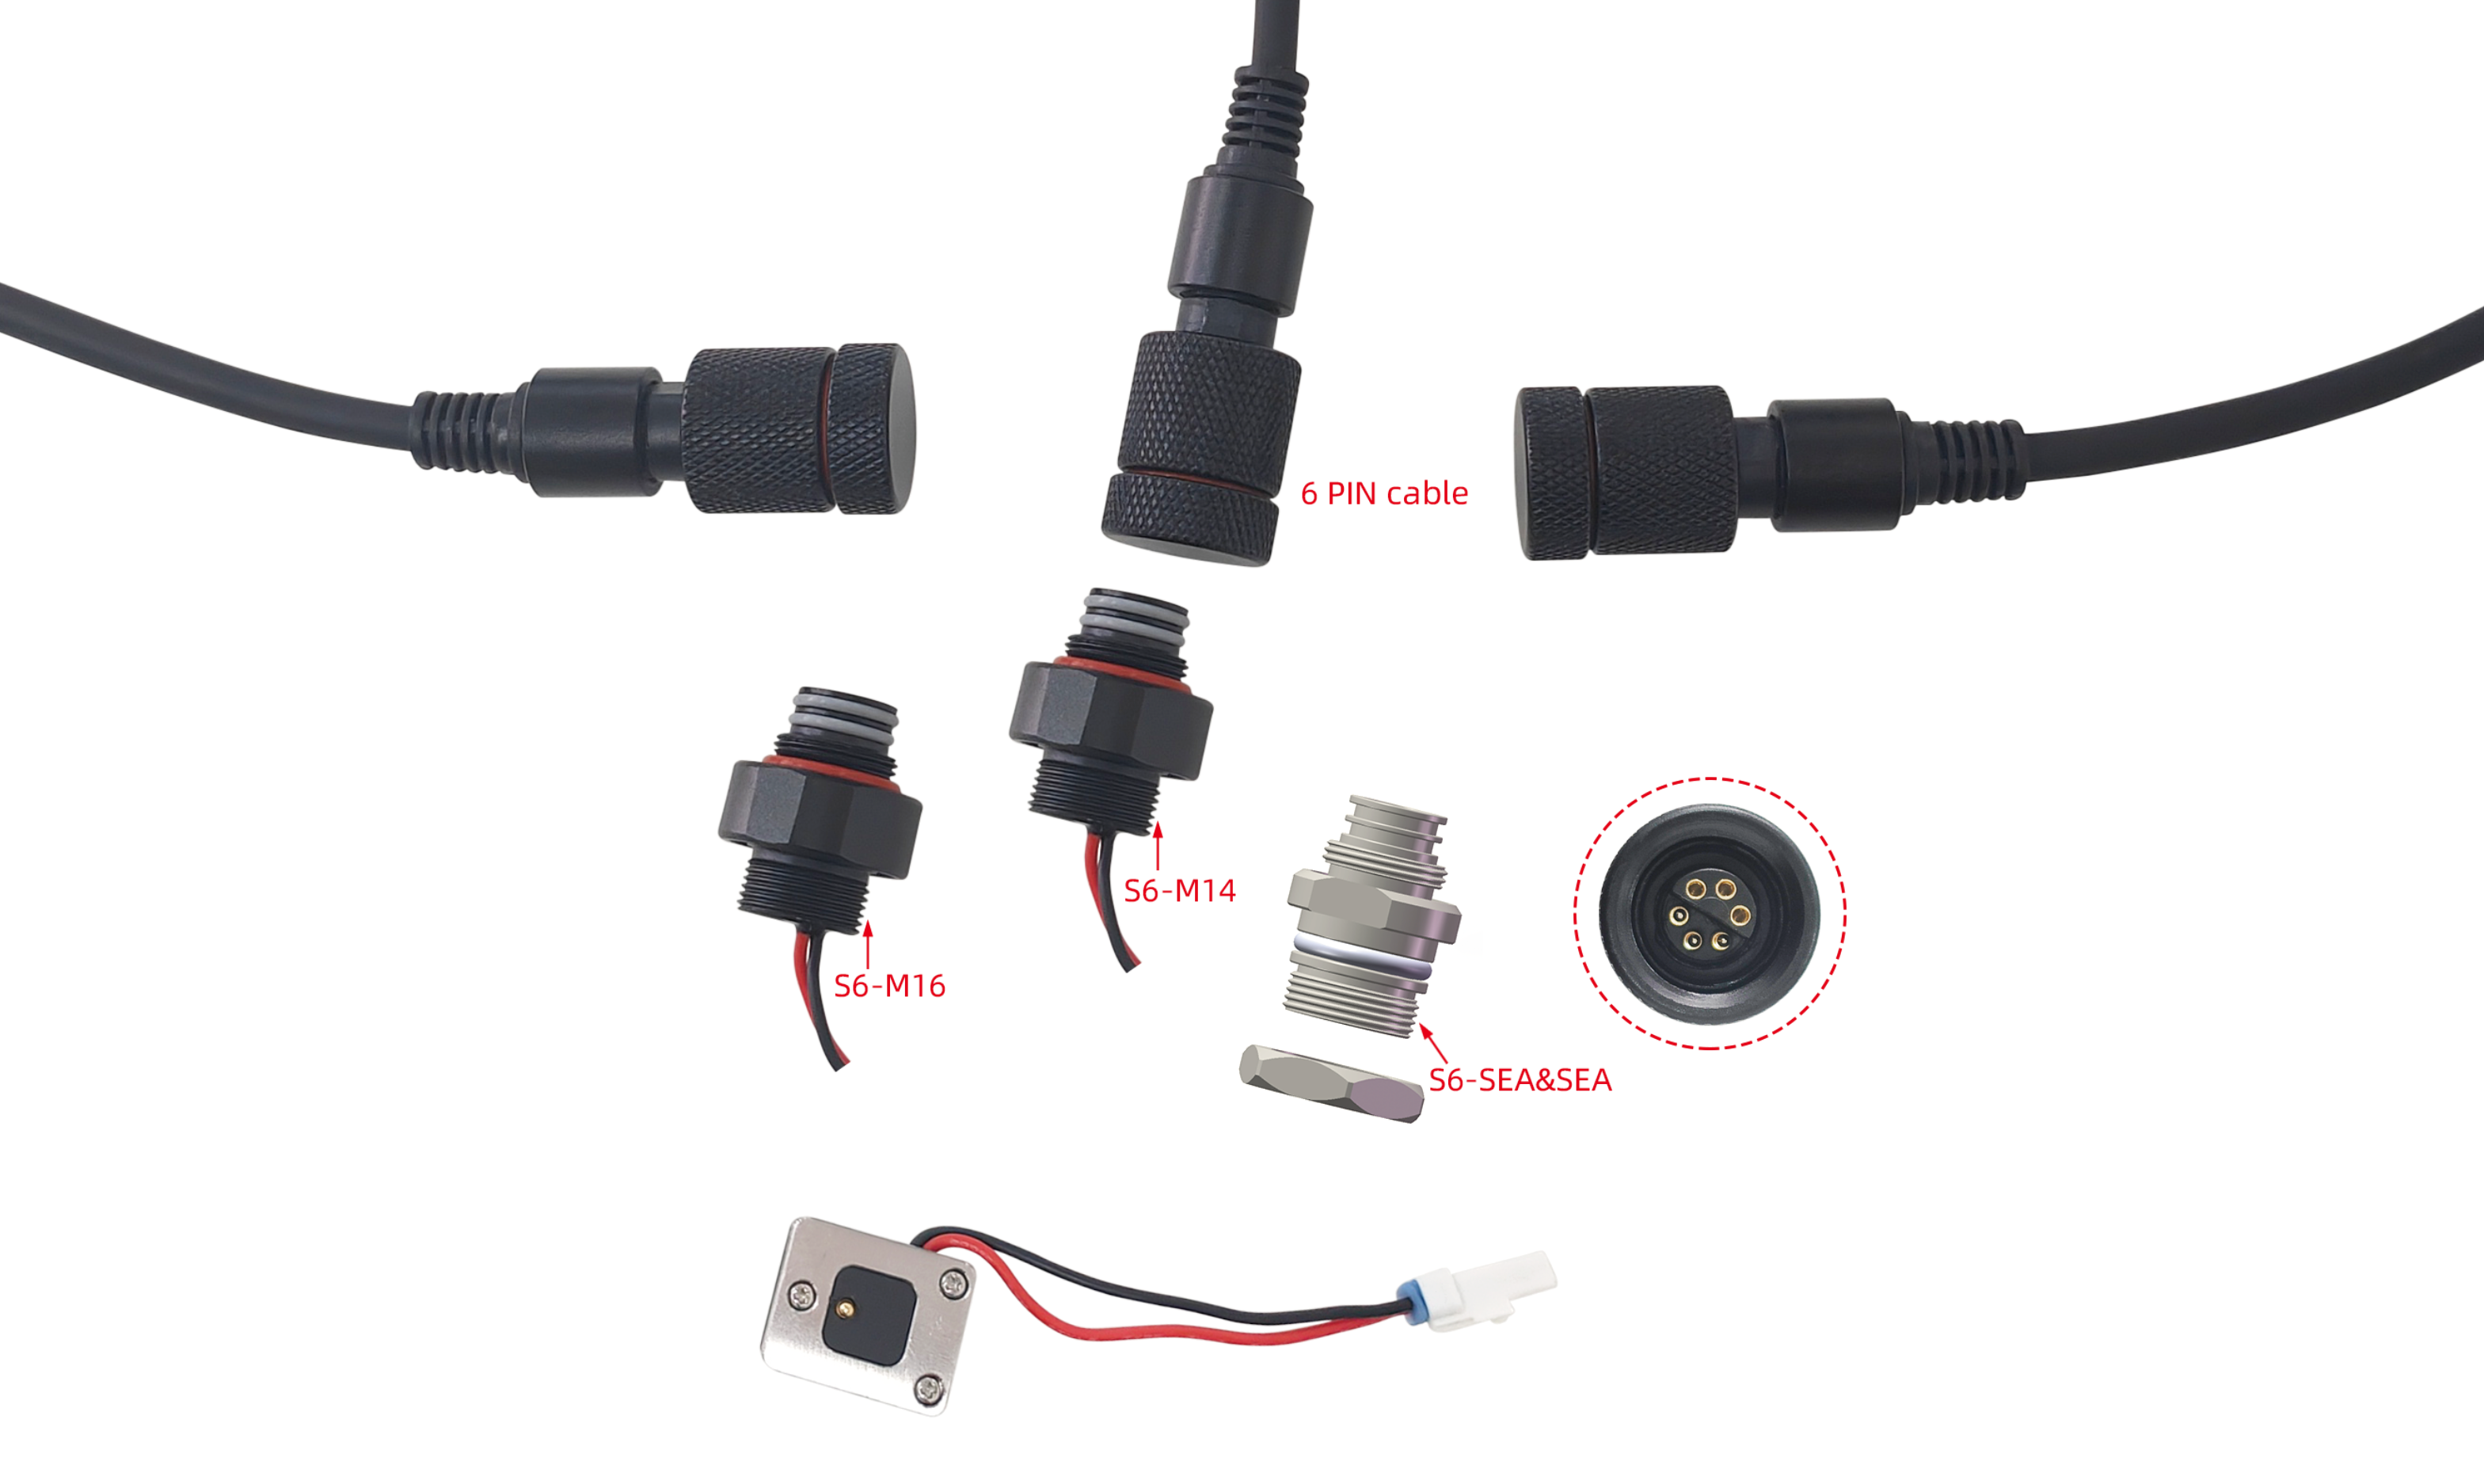 6pin Cable set include an adapter